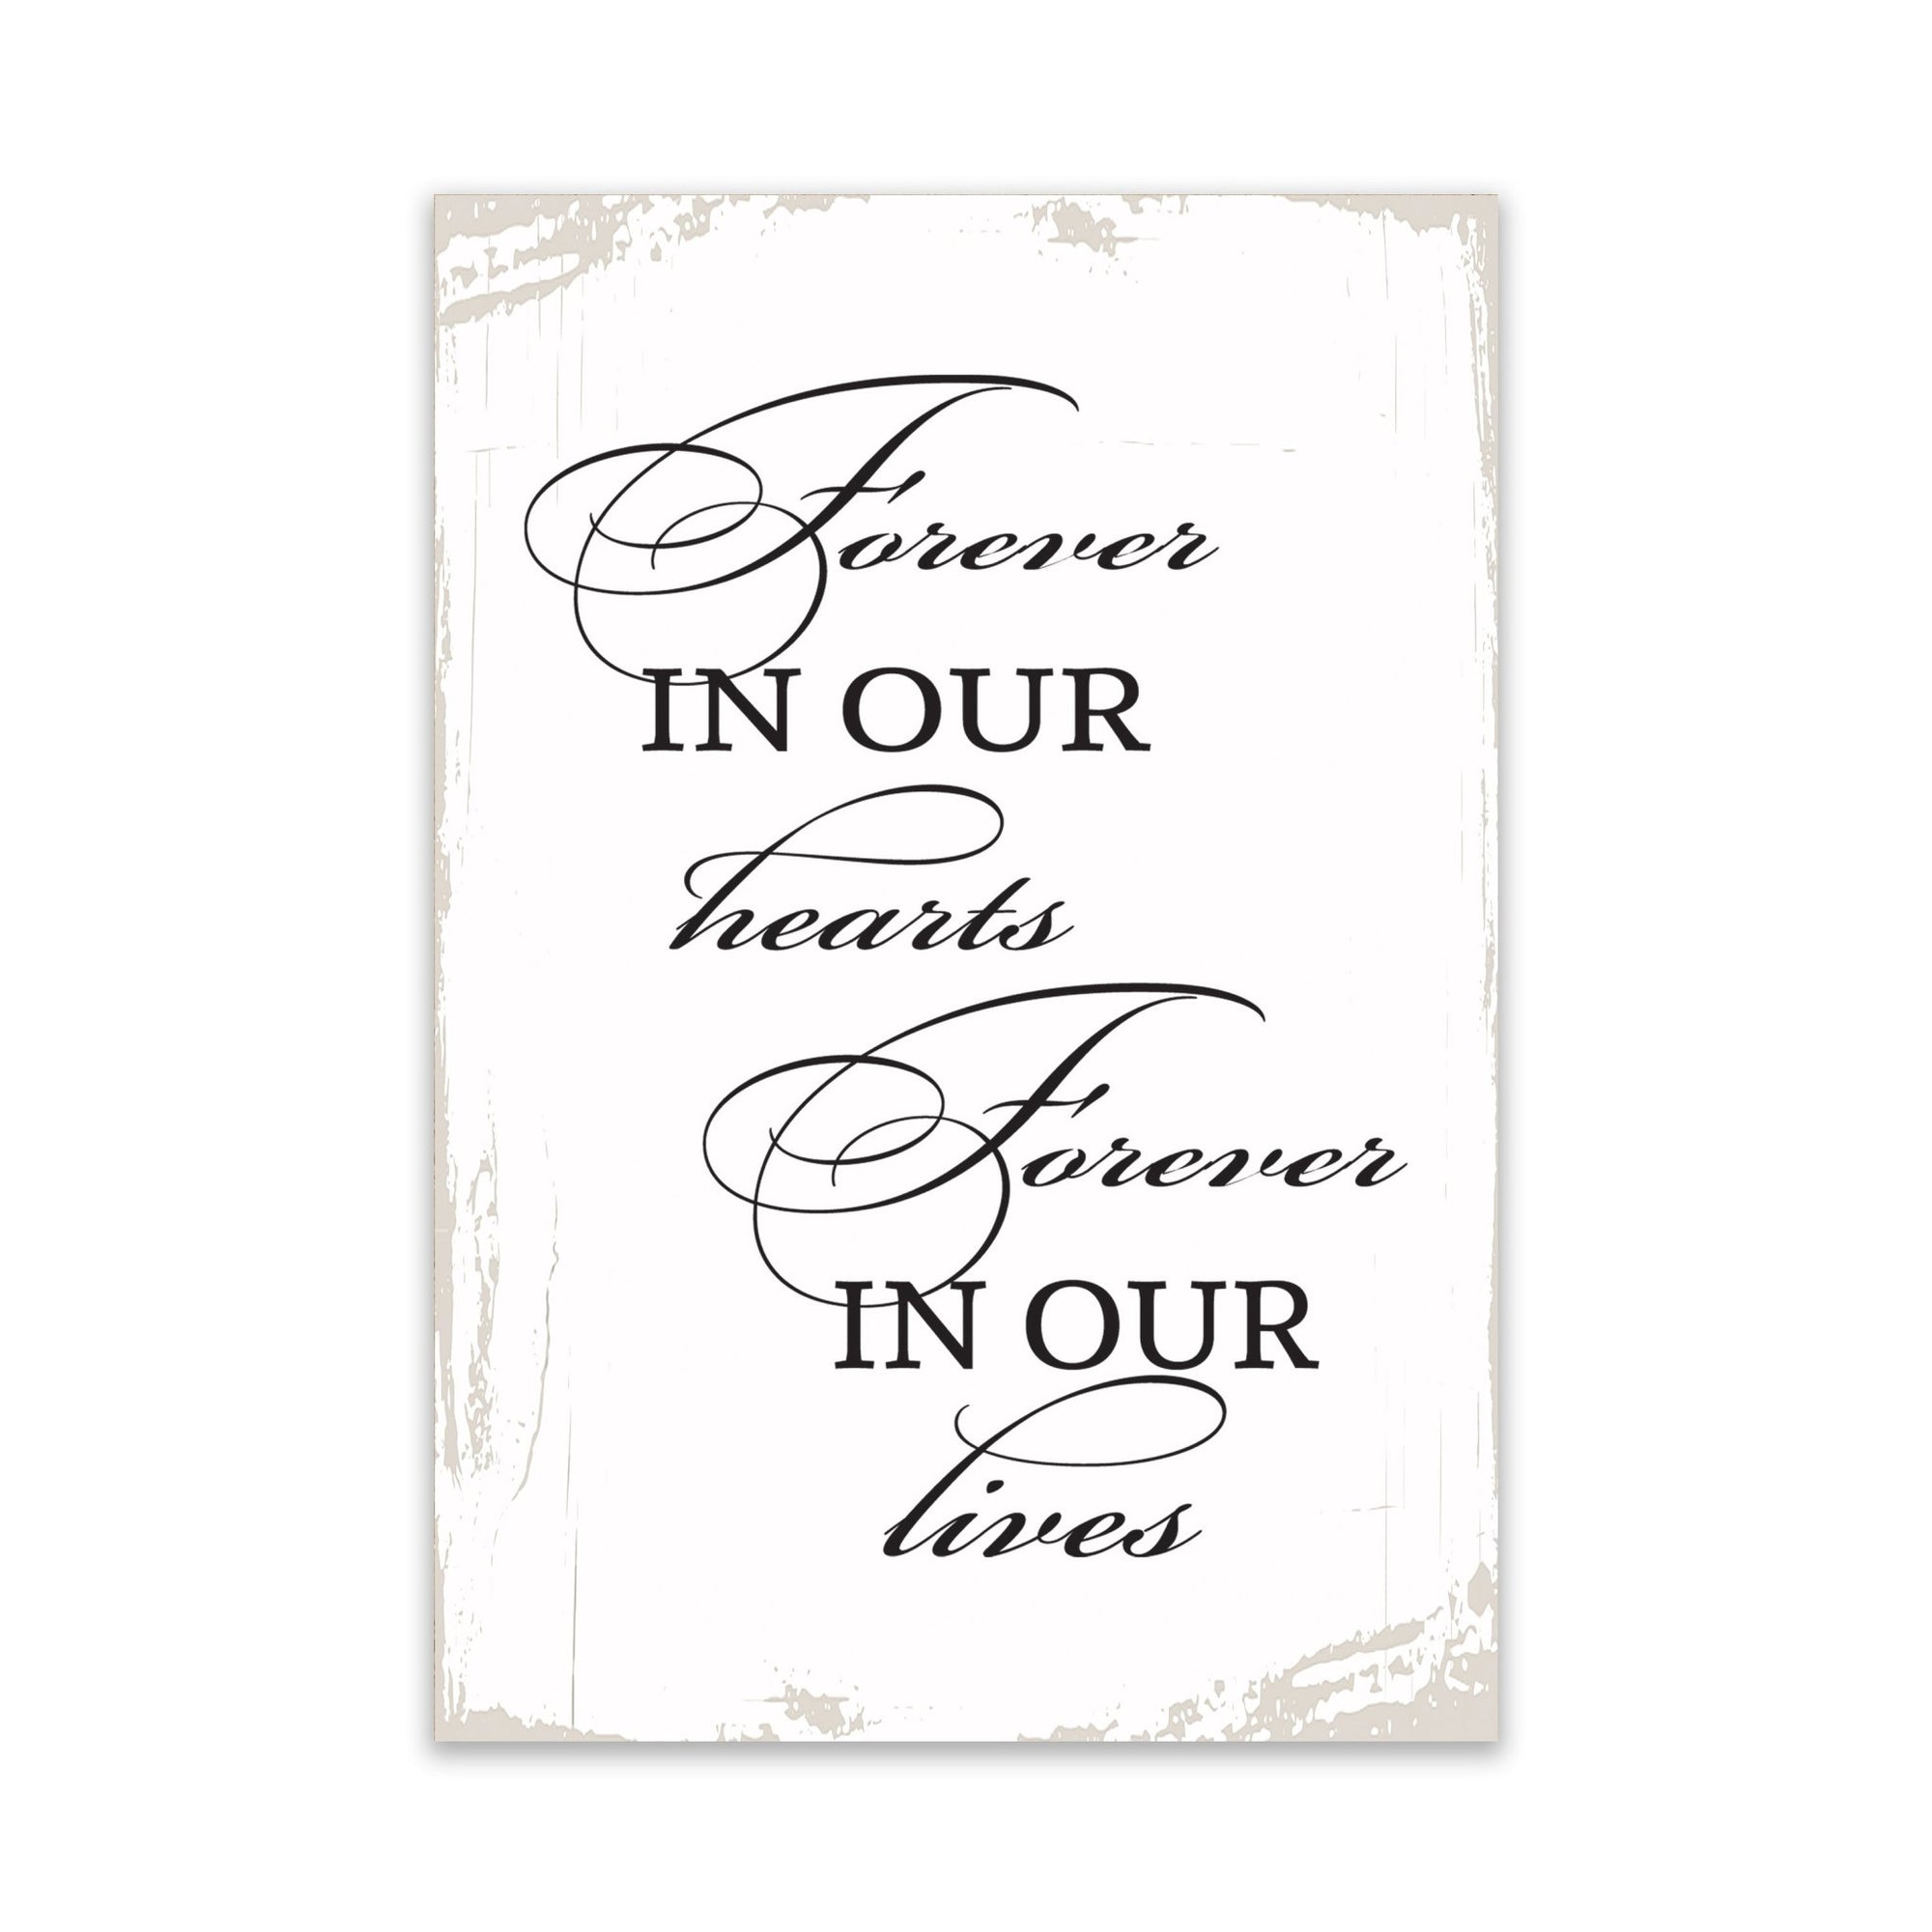 Modern Inspirational Memorial 5.5x 8 inches Wooden Sign Forever In Our Hearts - Plaque Tabletop Decoration Loss of Loved One Bereavement Sympathy Keepsake - LifeSong Milestones